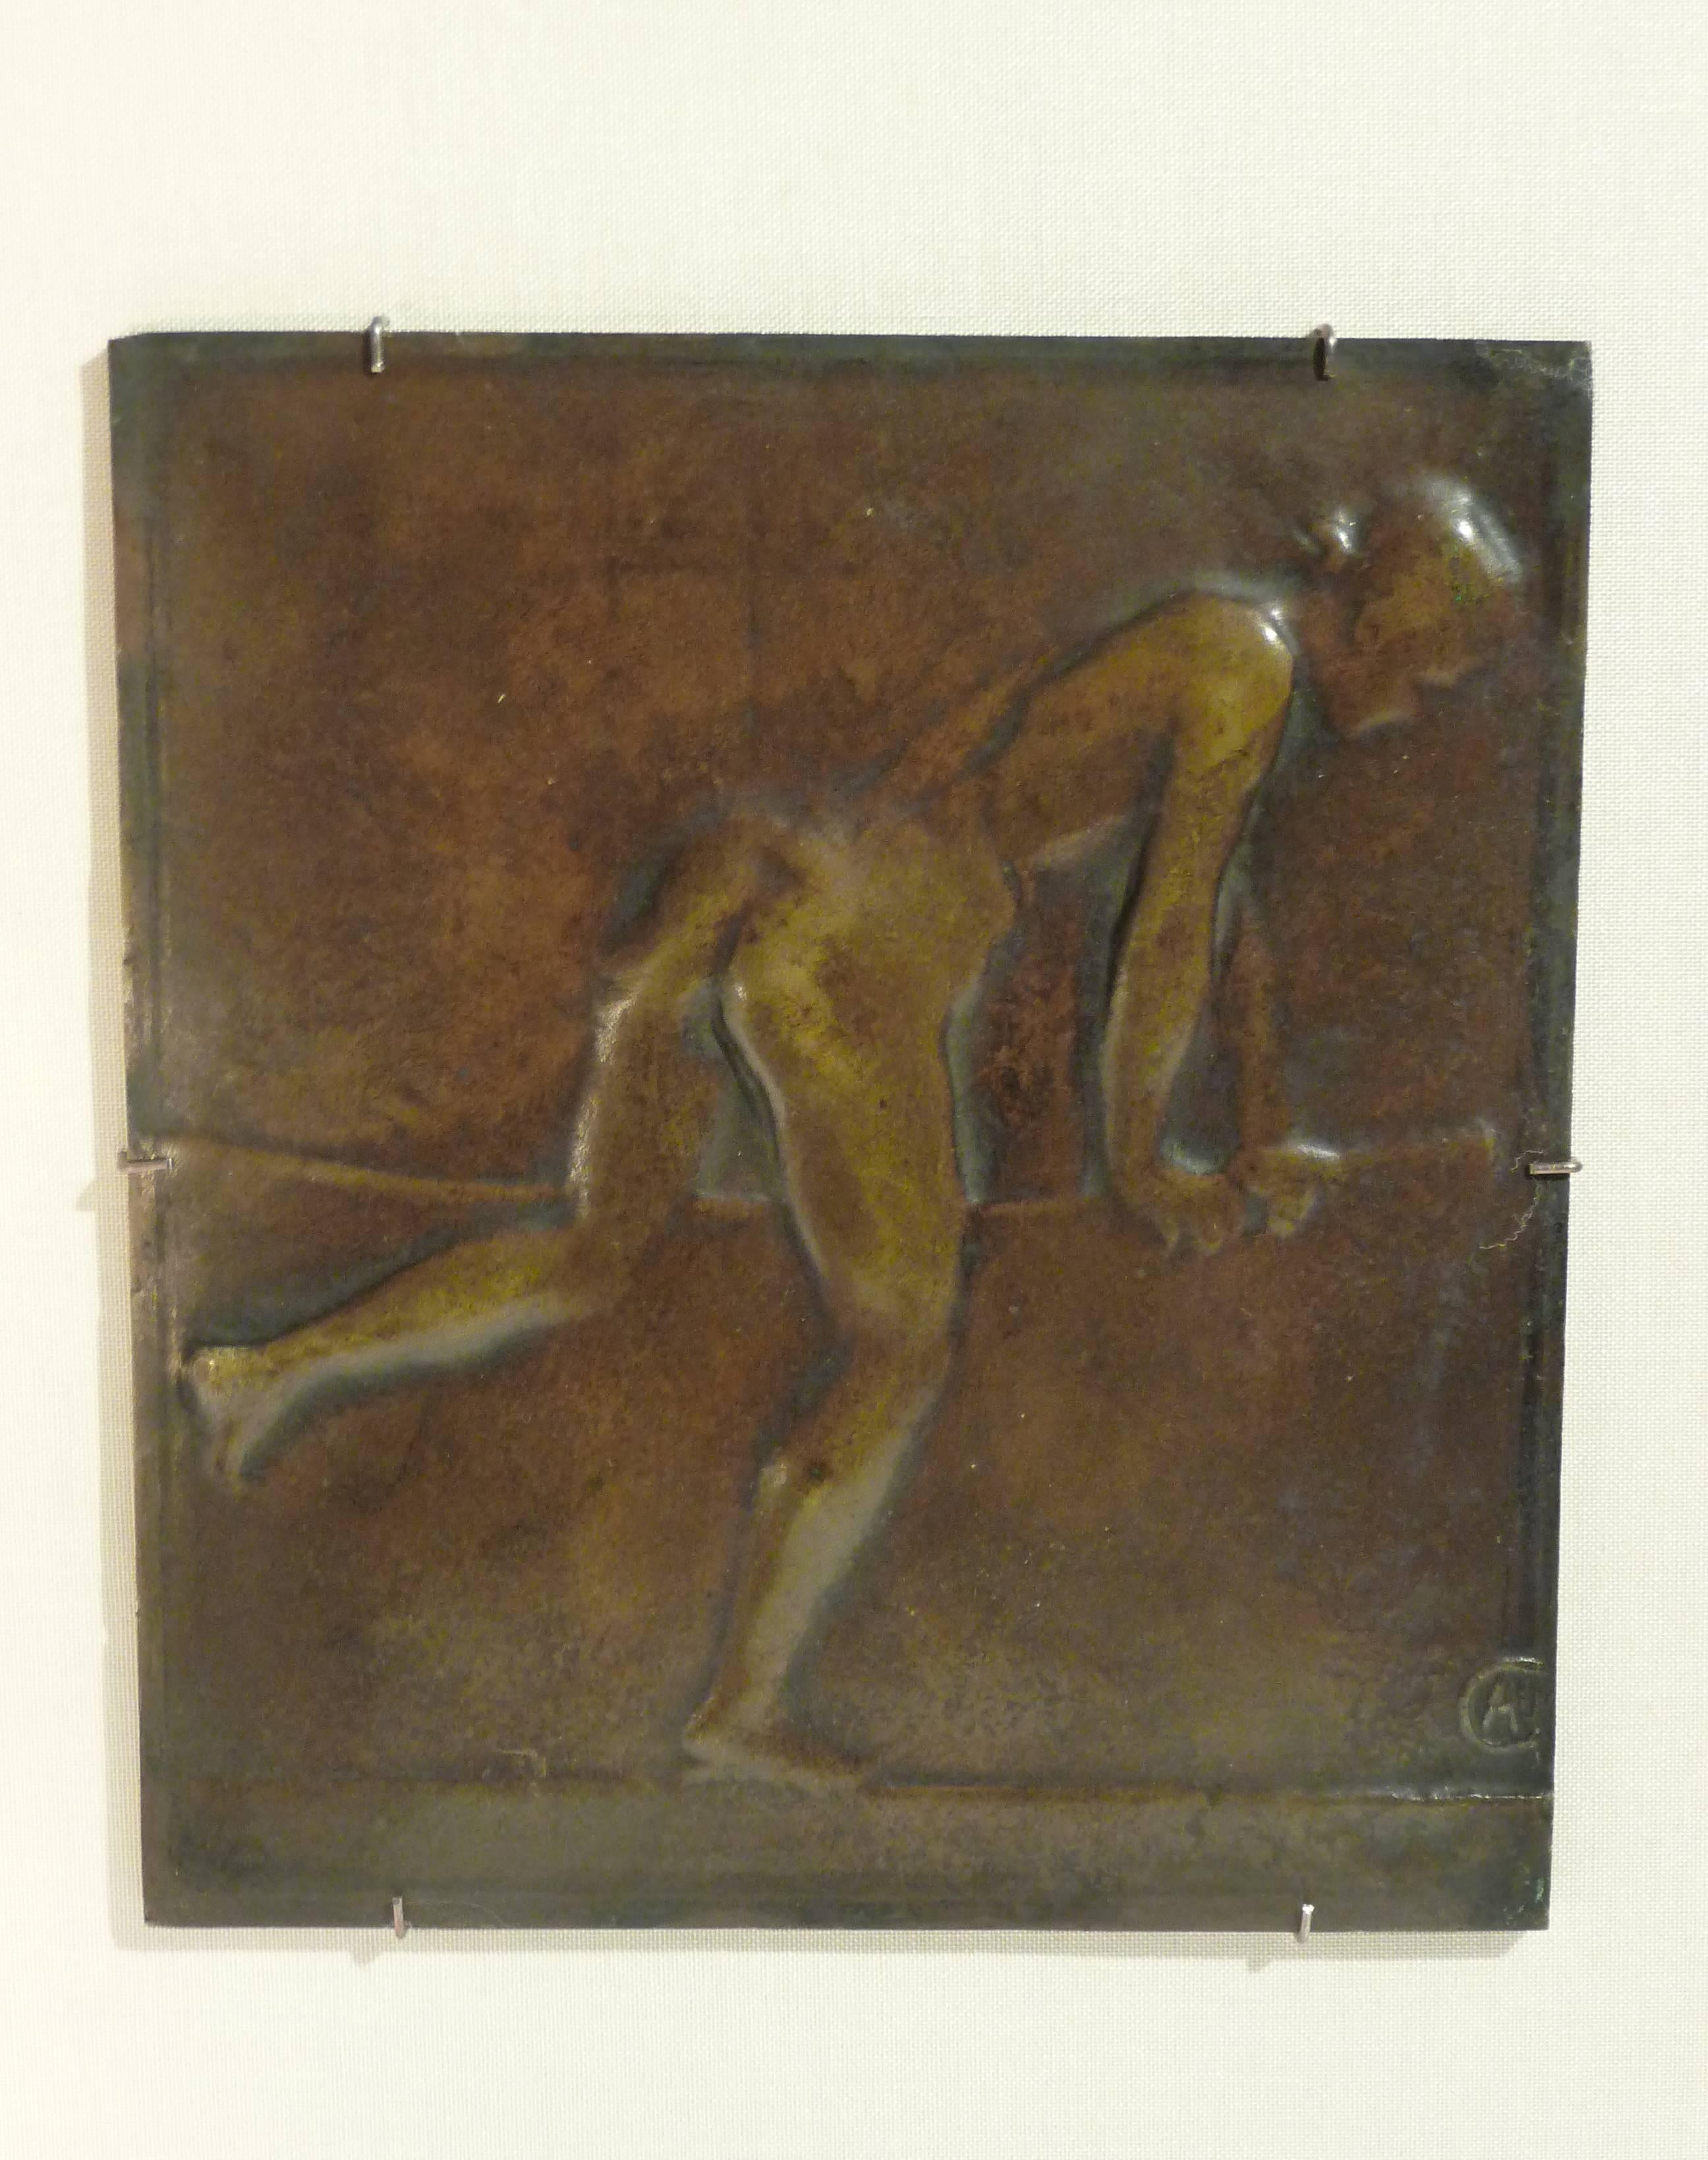 Alexandre Charpentier.
"Le Bain."
A bronze plaque.
Signed with the monogram of the artist.
Probably edited by Samuel Bing for l'Art Nouveau Bing.
Exhibition: Paris, musée d'Orsay, 22 January-13 April 2008, n.162, ill. p. 163.
   